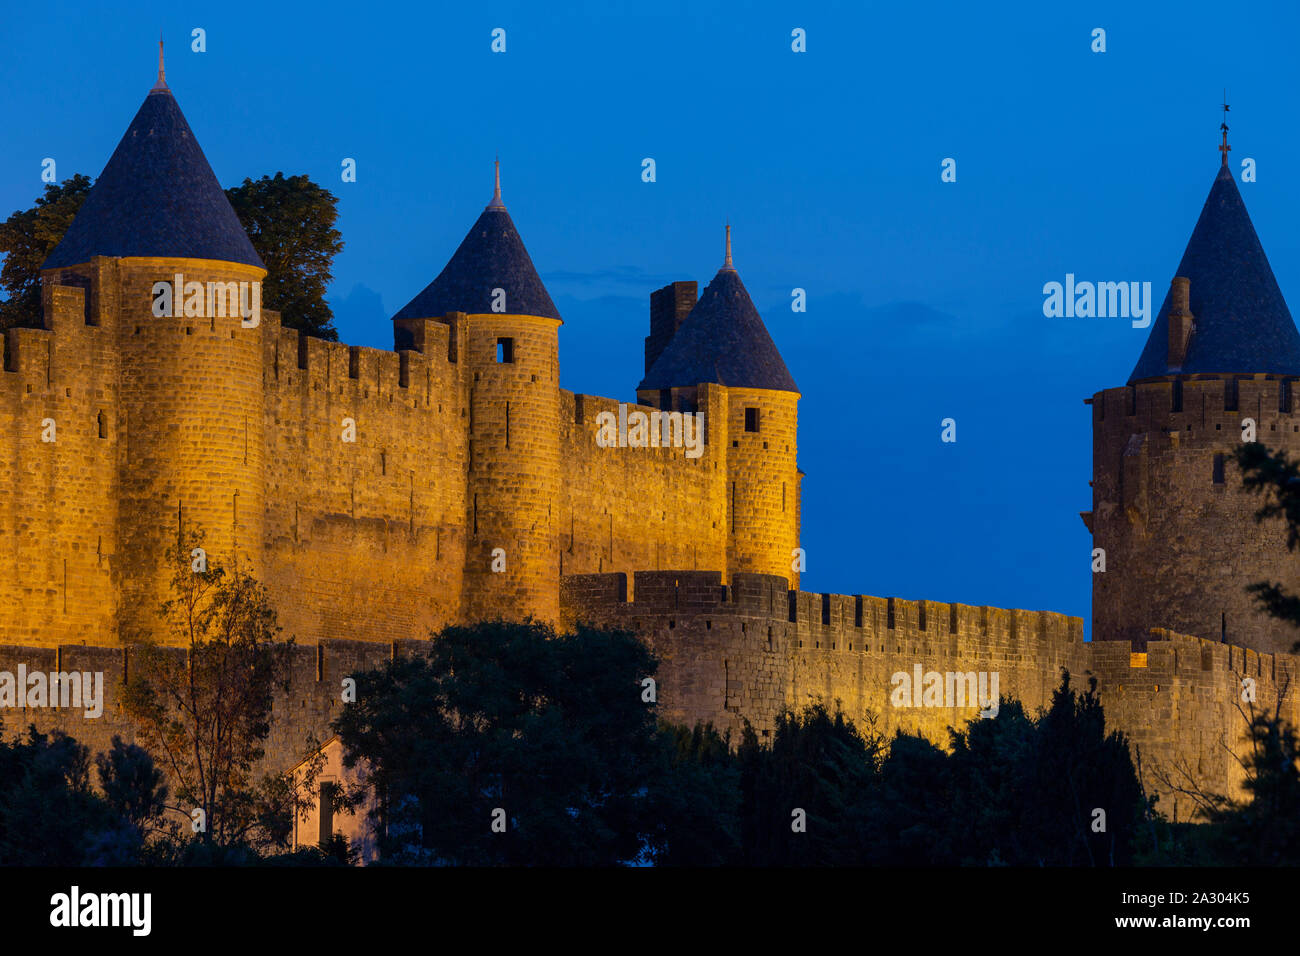 The medieval fortress and walled city of Carcassonne in the Languedoc-Roussillon region of southwest France. Founded by the Visigoths in the fith cent Stock Photo